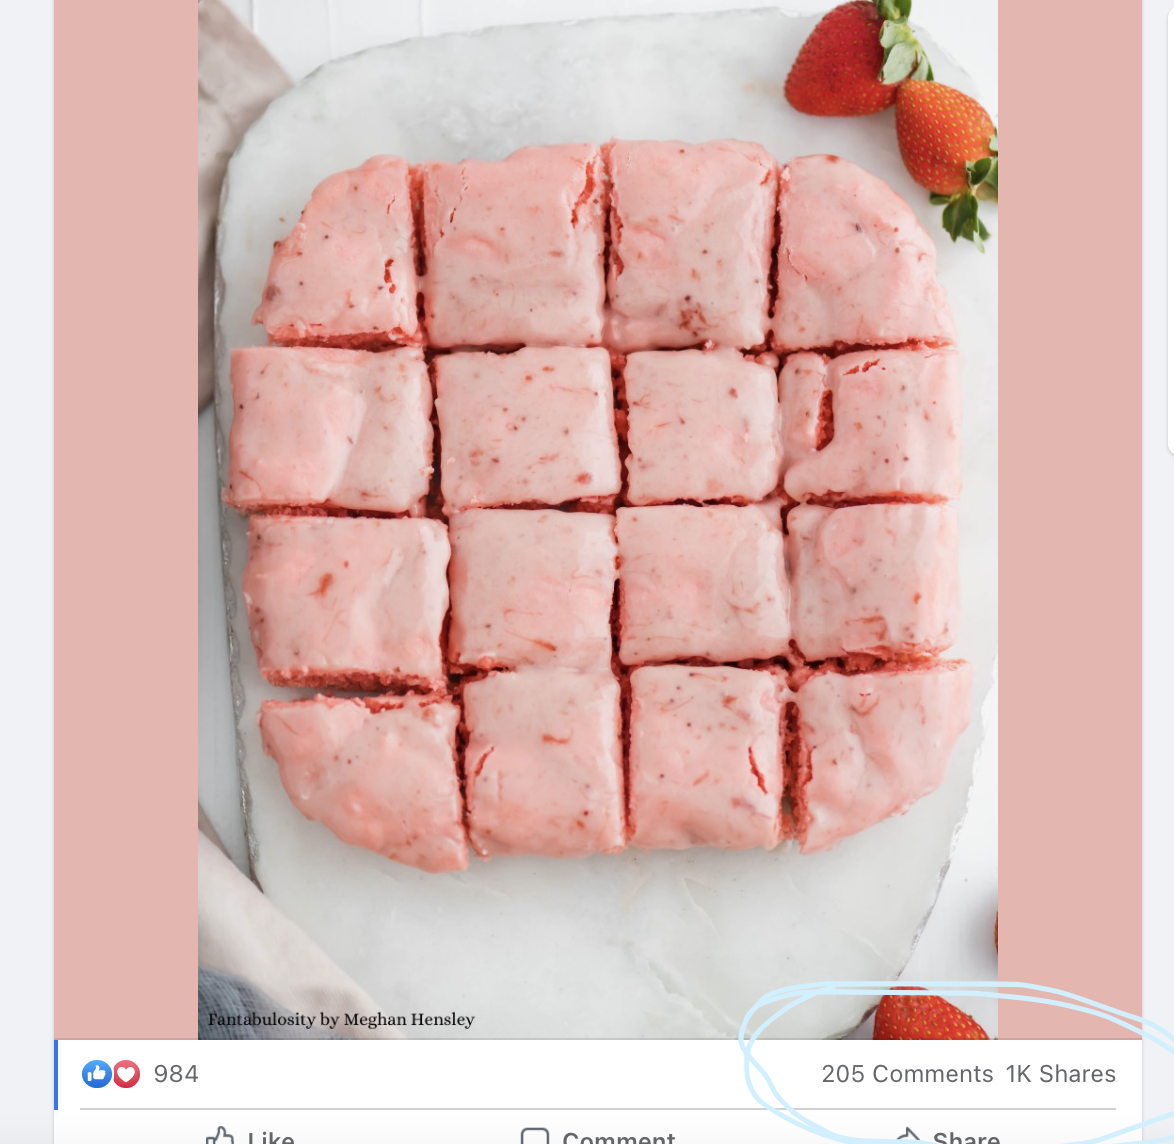 Strawberry Brownies recipe gone viral on Facebook